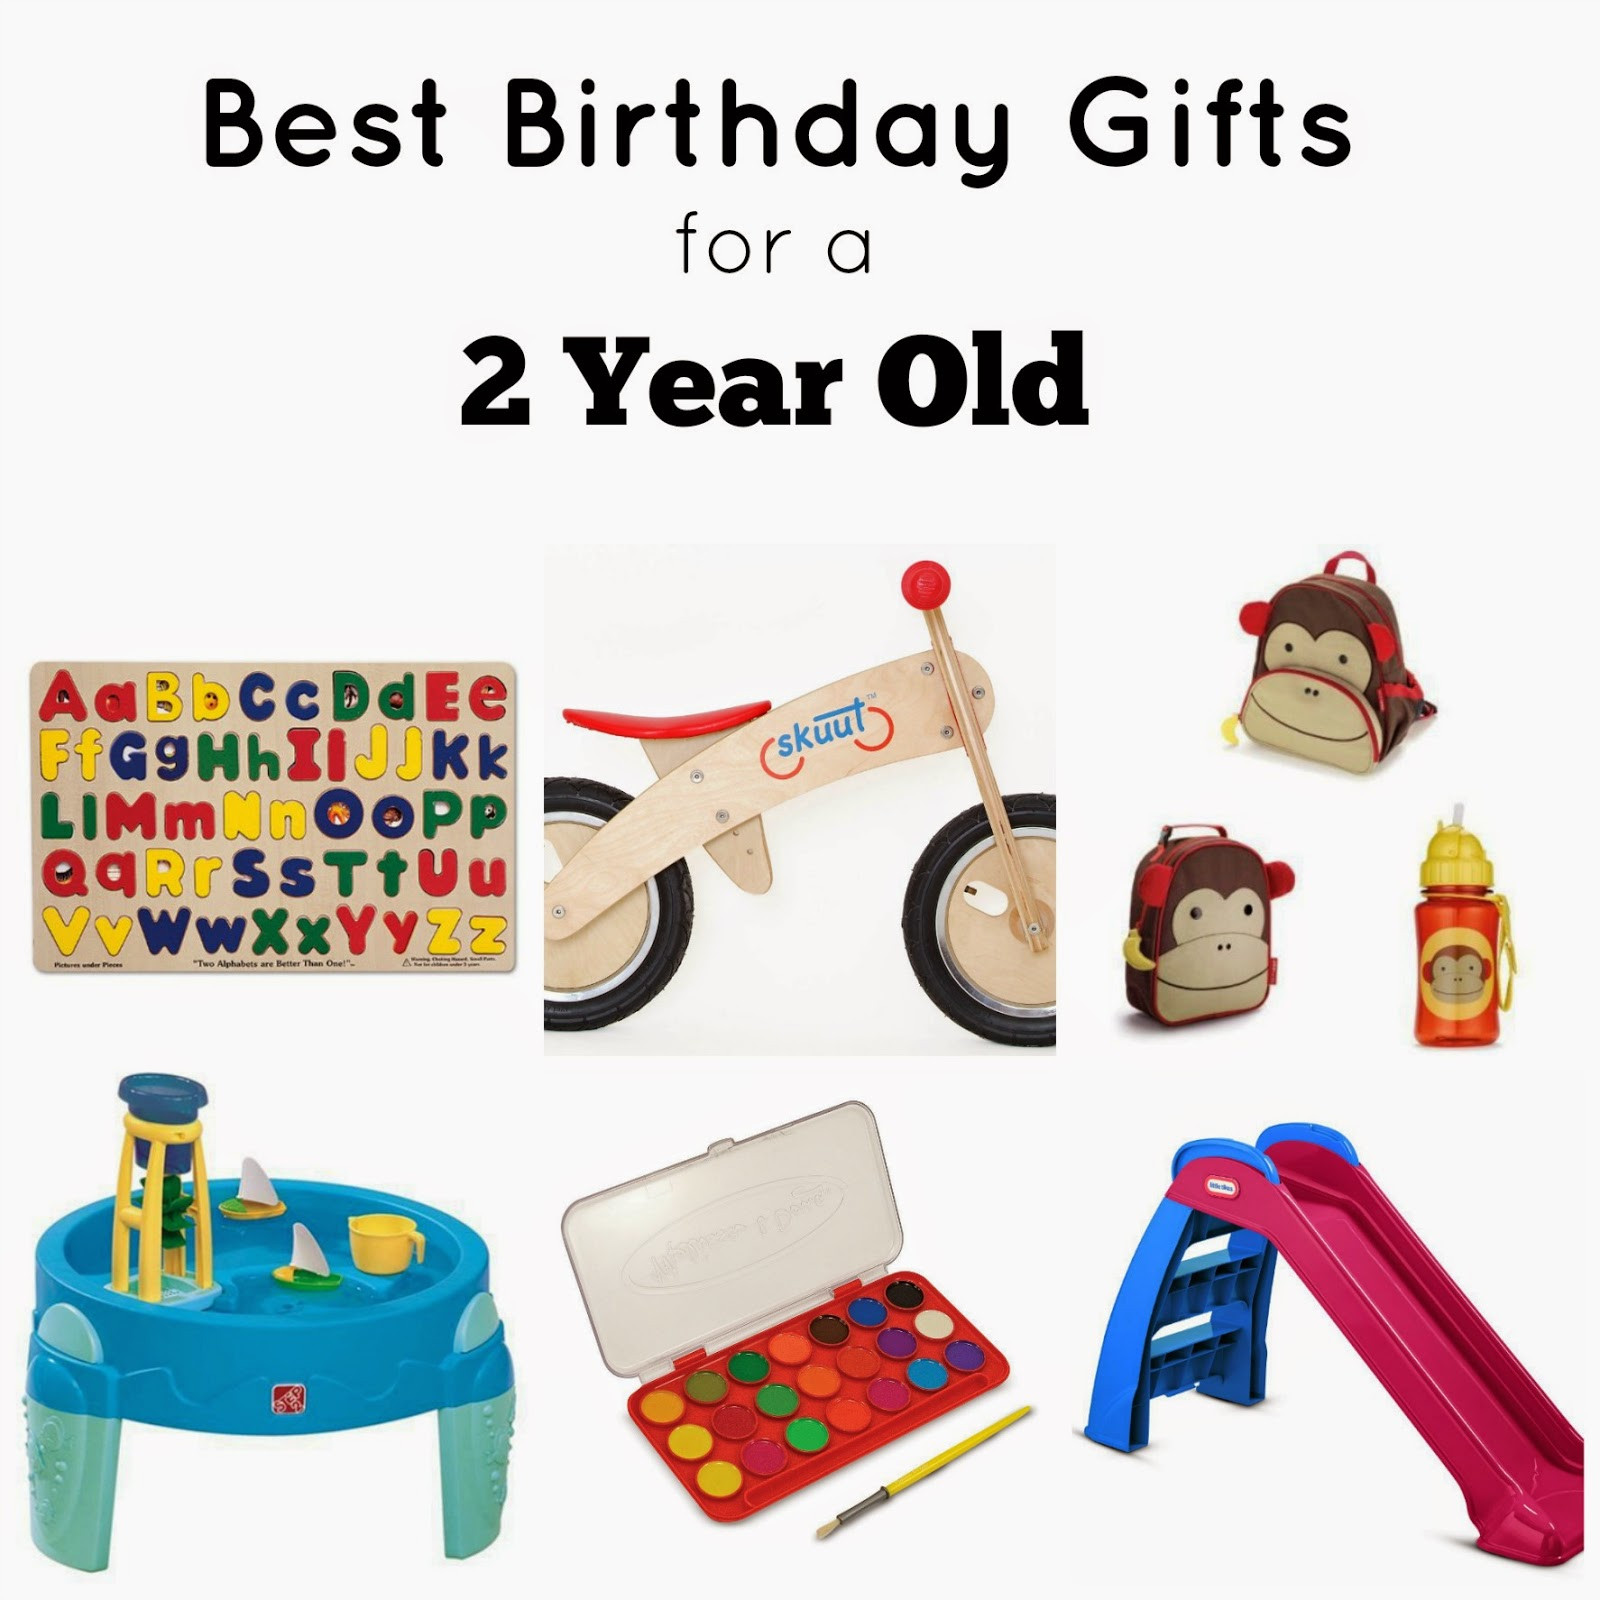 2 Year Old Birthday Gift
 Our Life on a Bud Best Birthday Gifts for a 2 Year Old